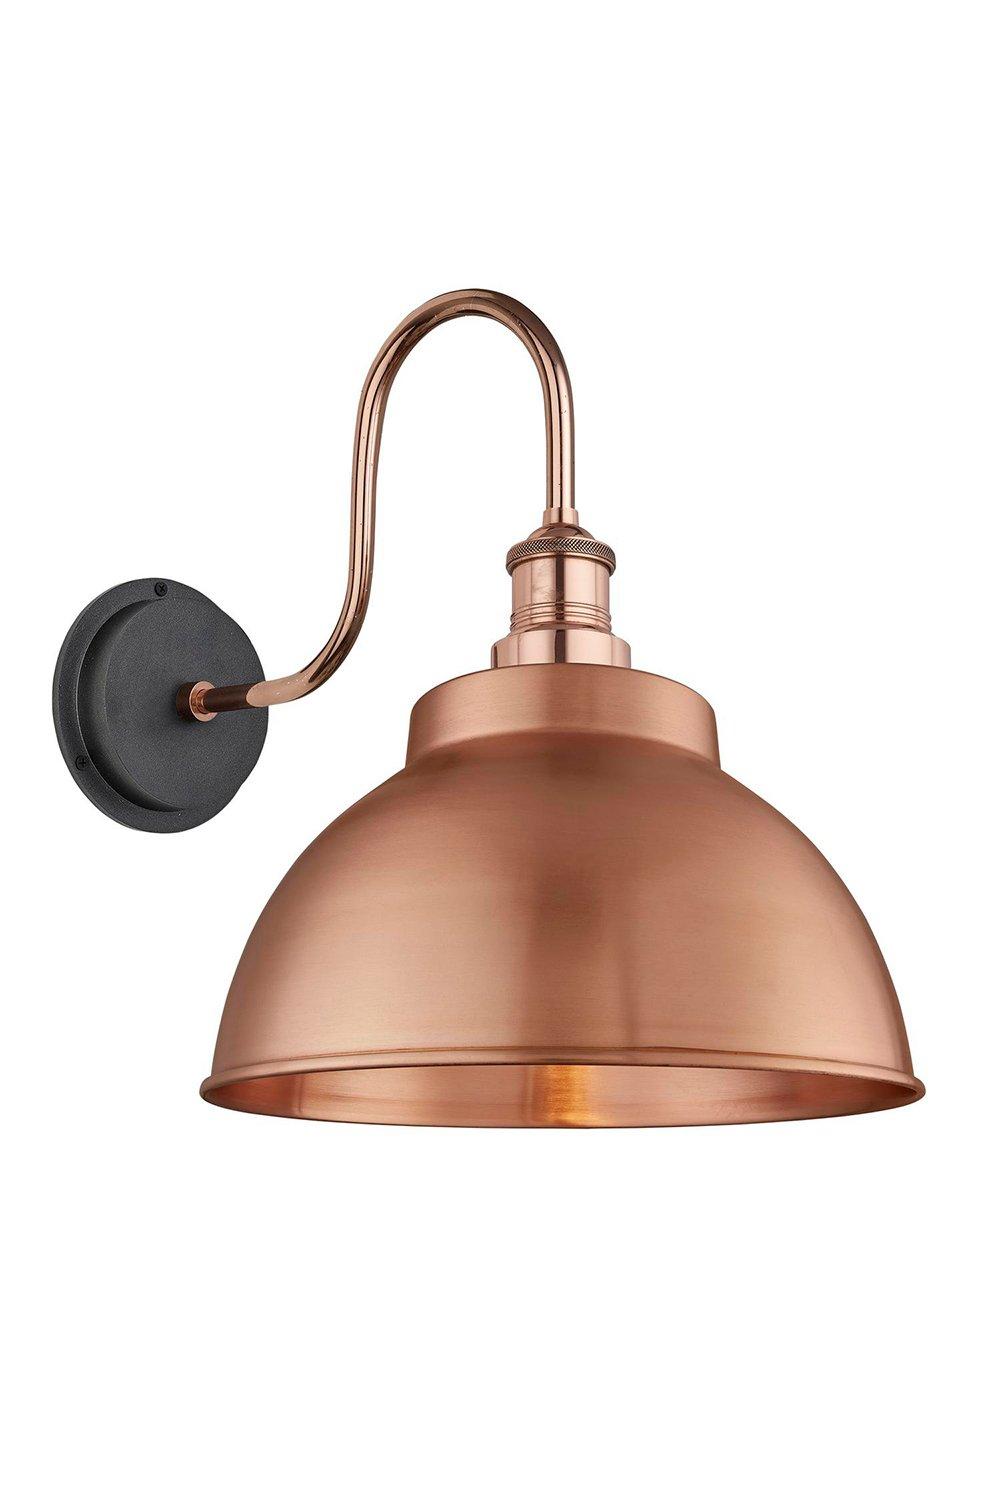 Swan Neck Outdoor & Bathroom Dome Wall Light, 13 Inch, Copper, Copper Holder